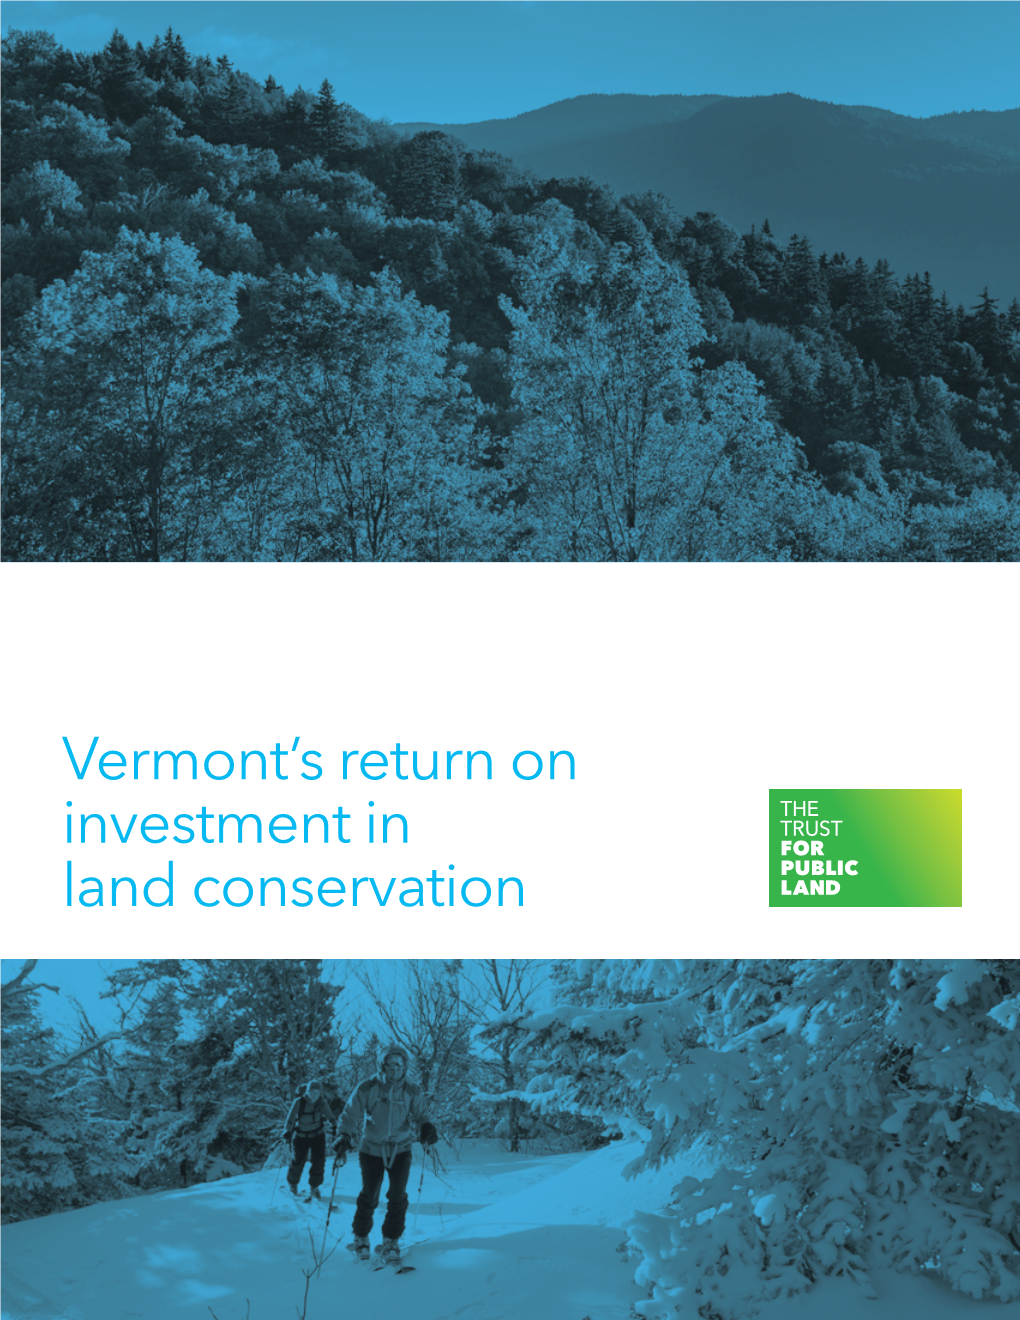 Vermont's Return on Investment in Land Conservation